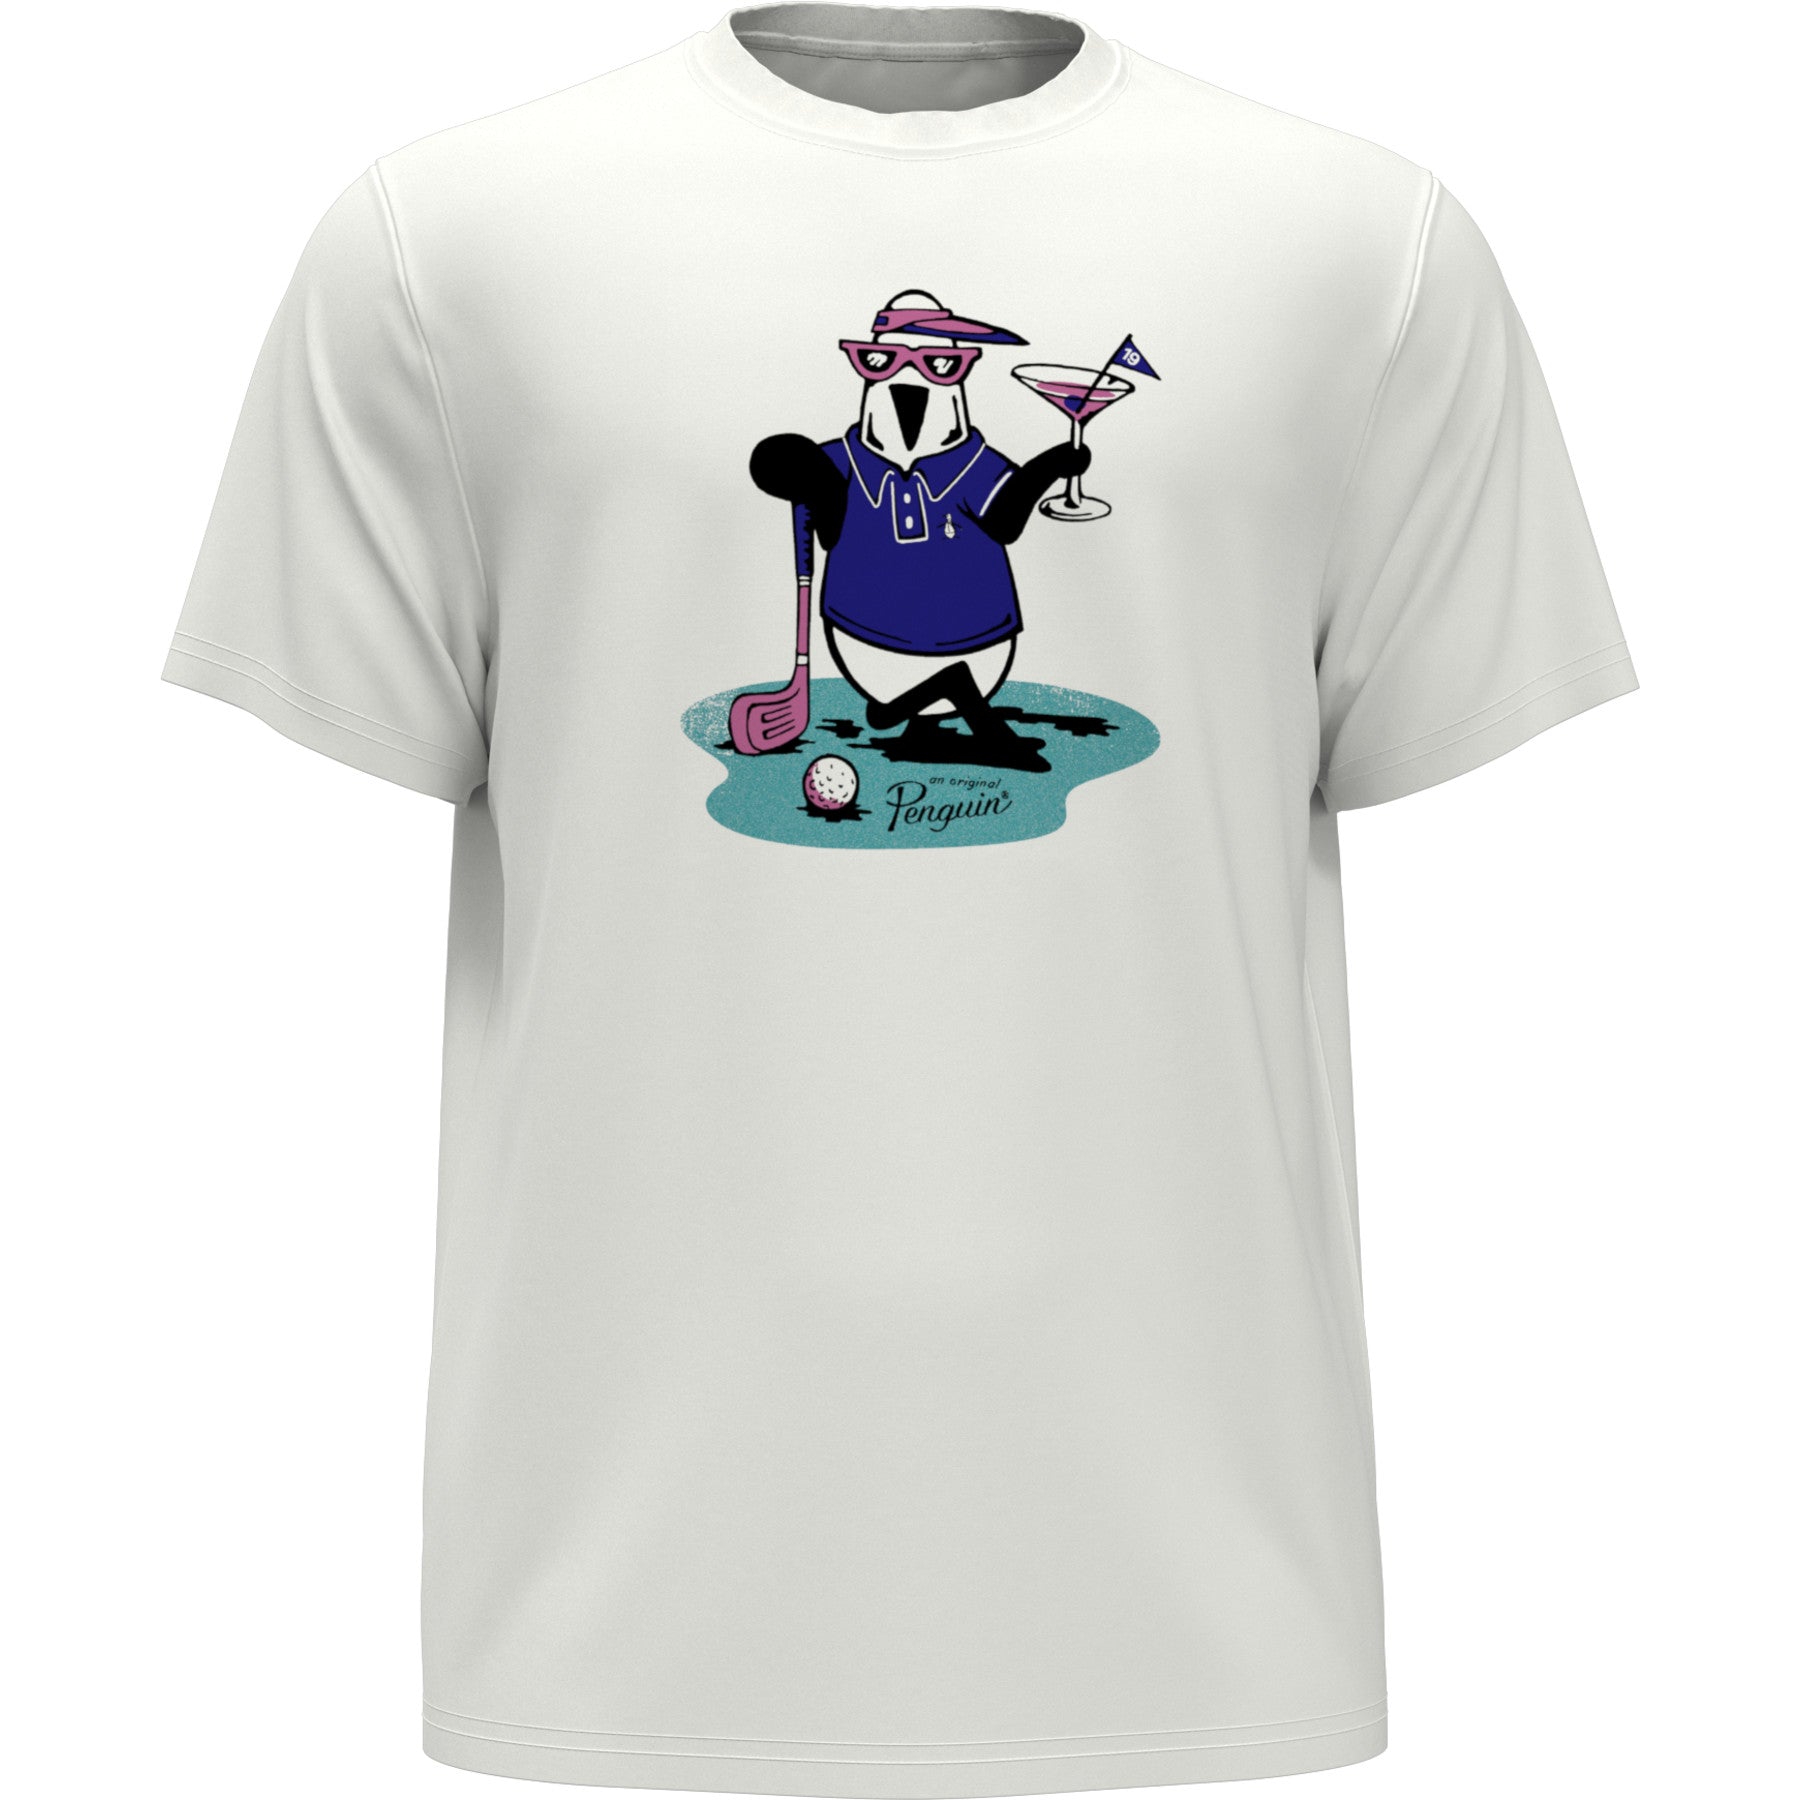 View Petes In Da Party Graphic Golf TShirt In Bright White information